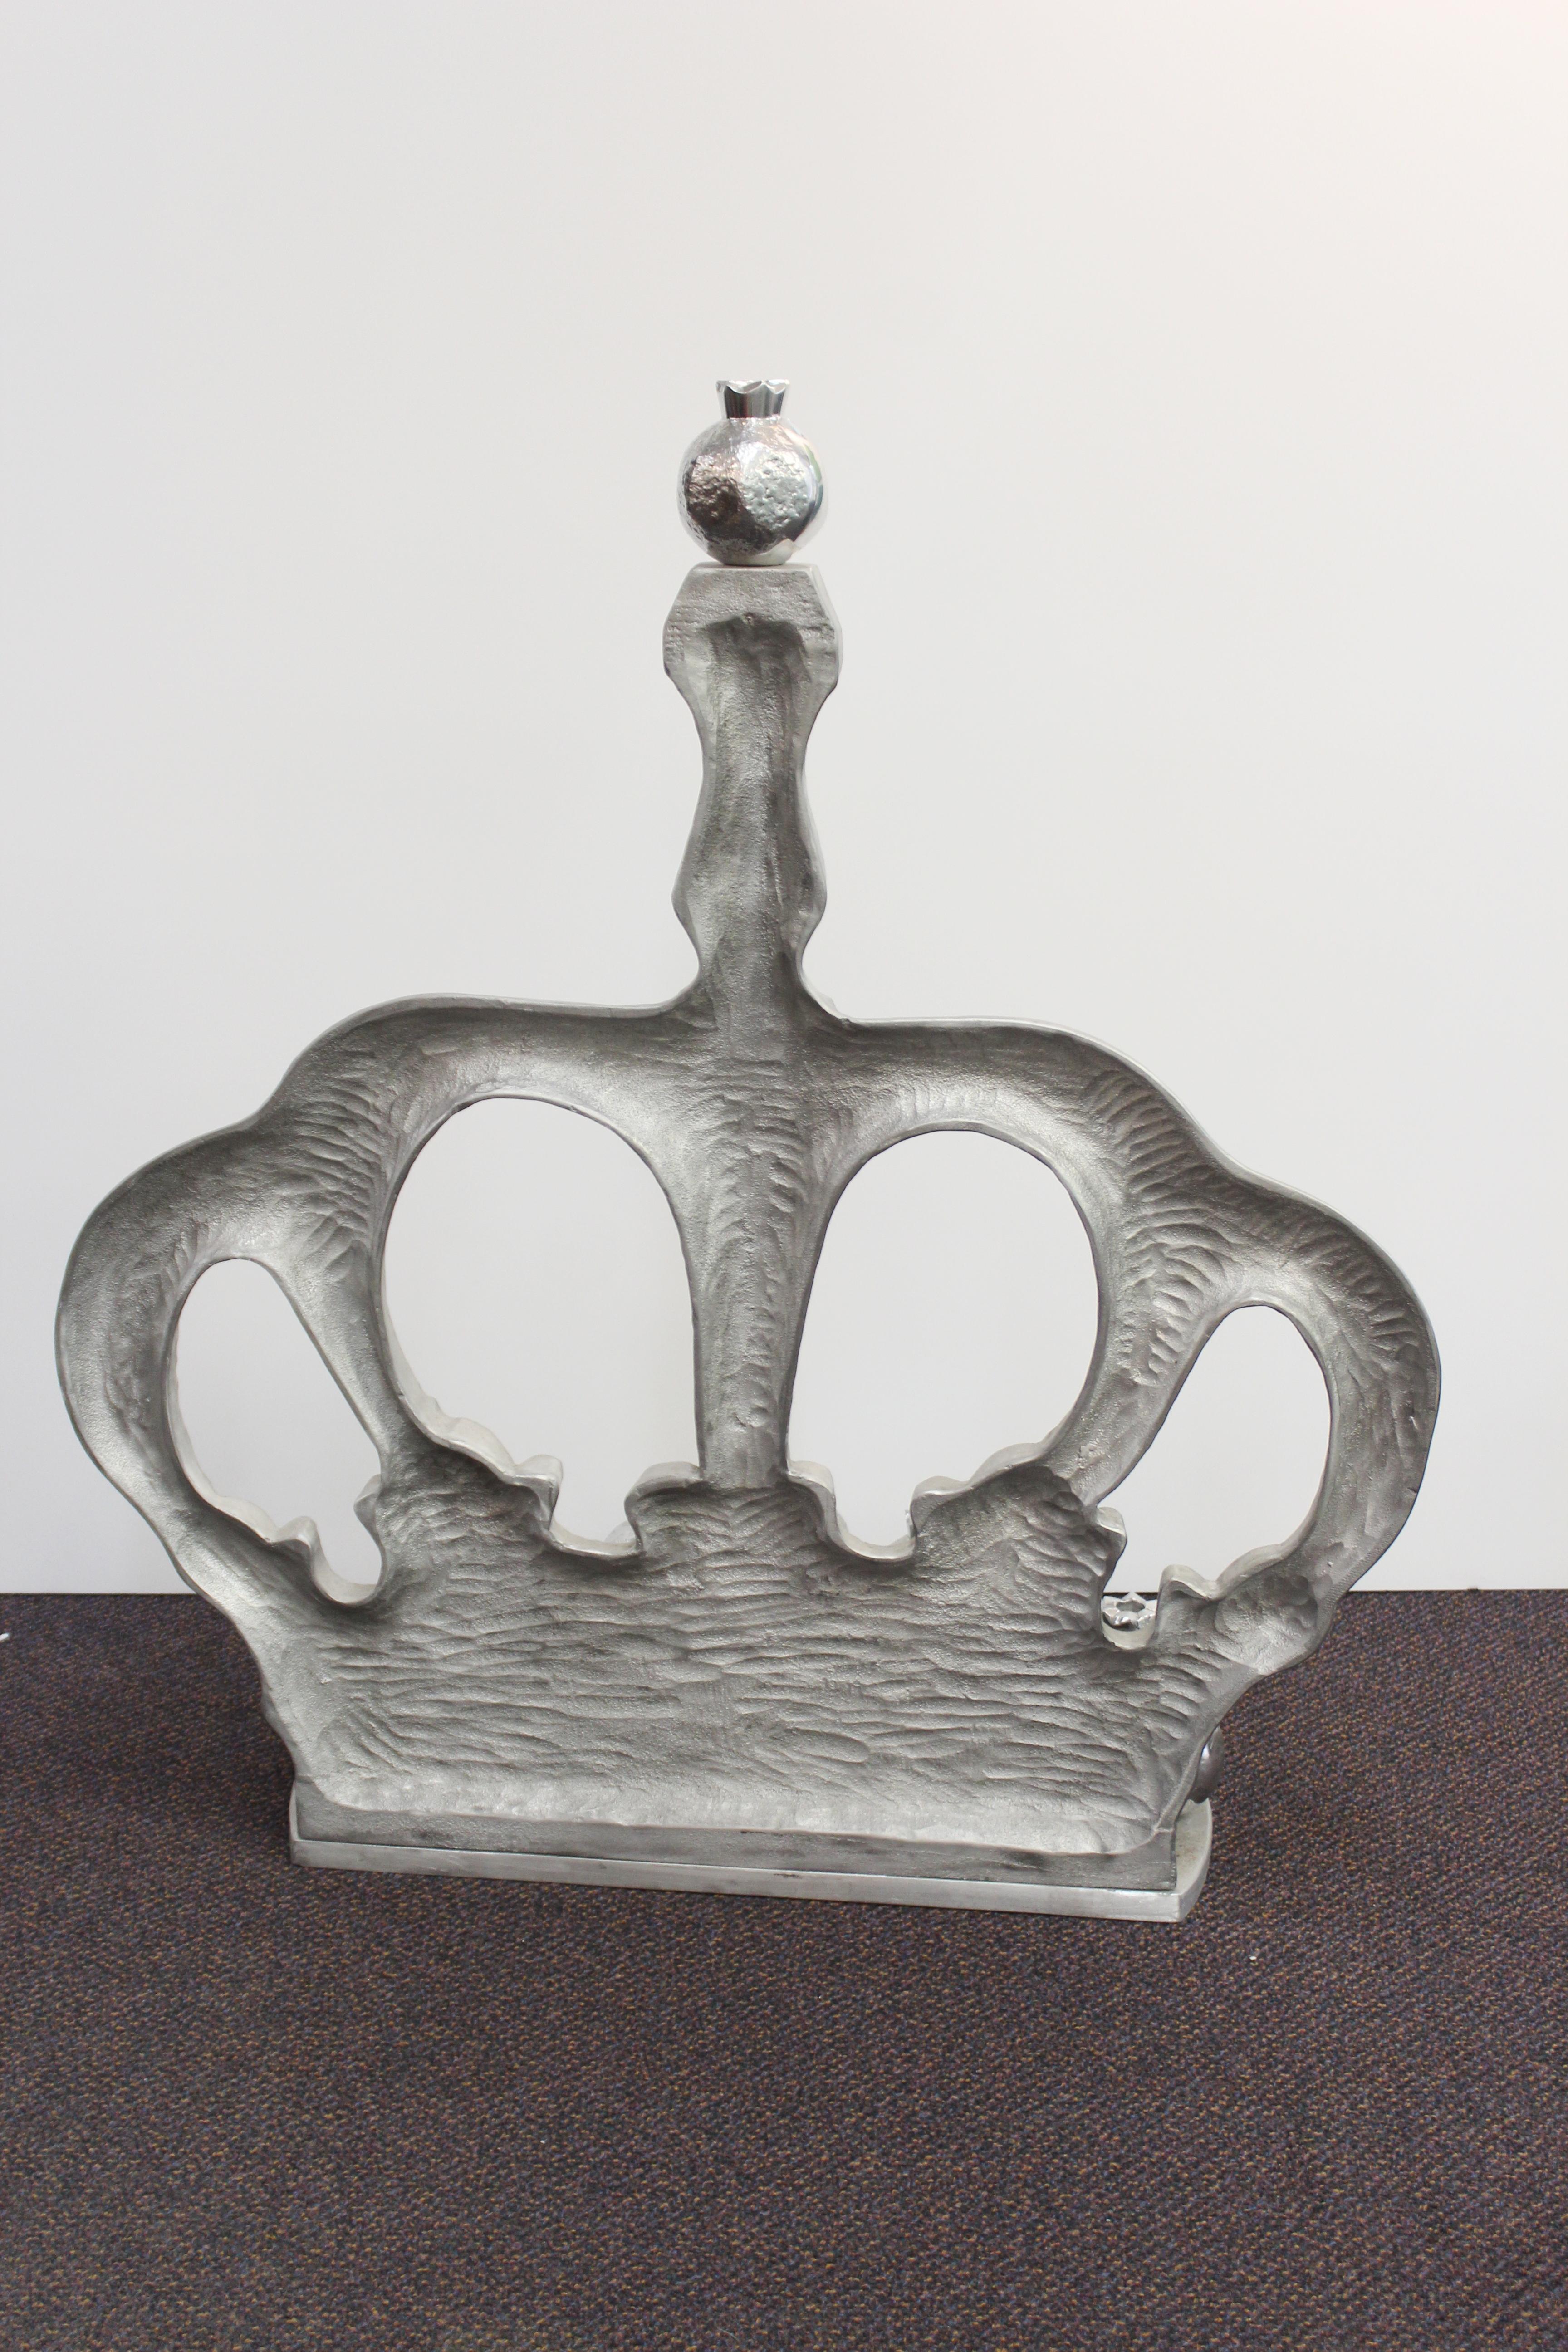 Contemporary Oded Halahmy 'Crowning the Universe' in Aluminum Cast